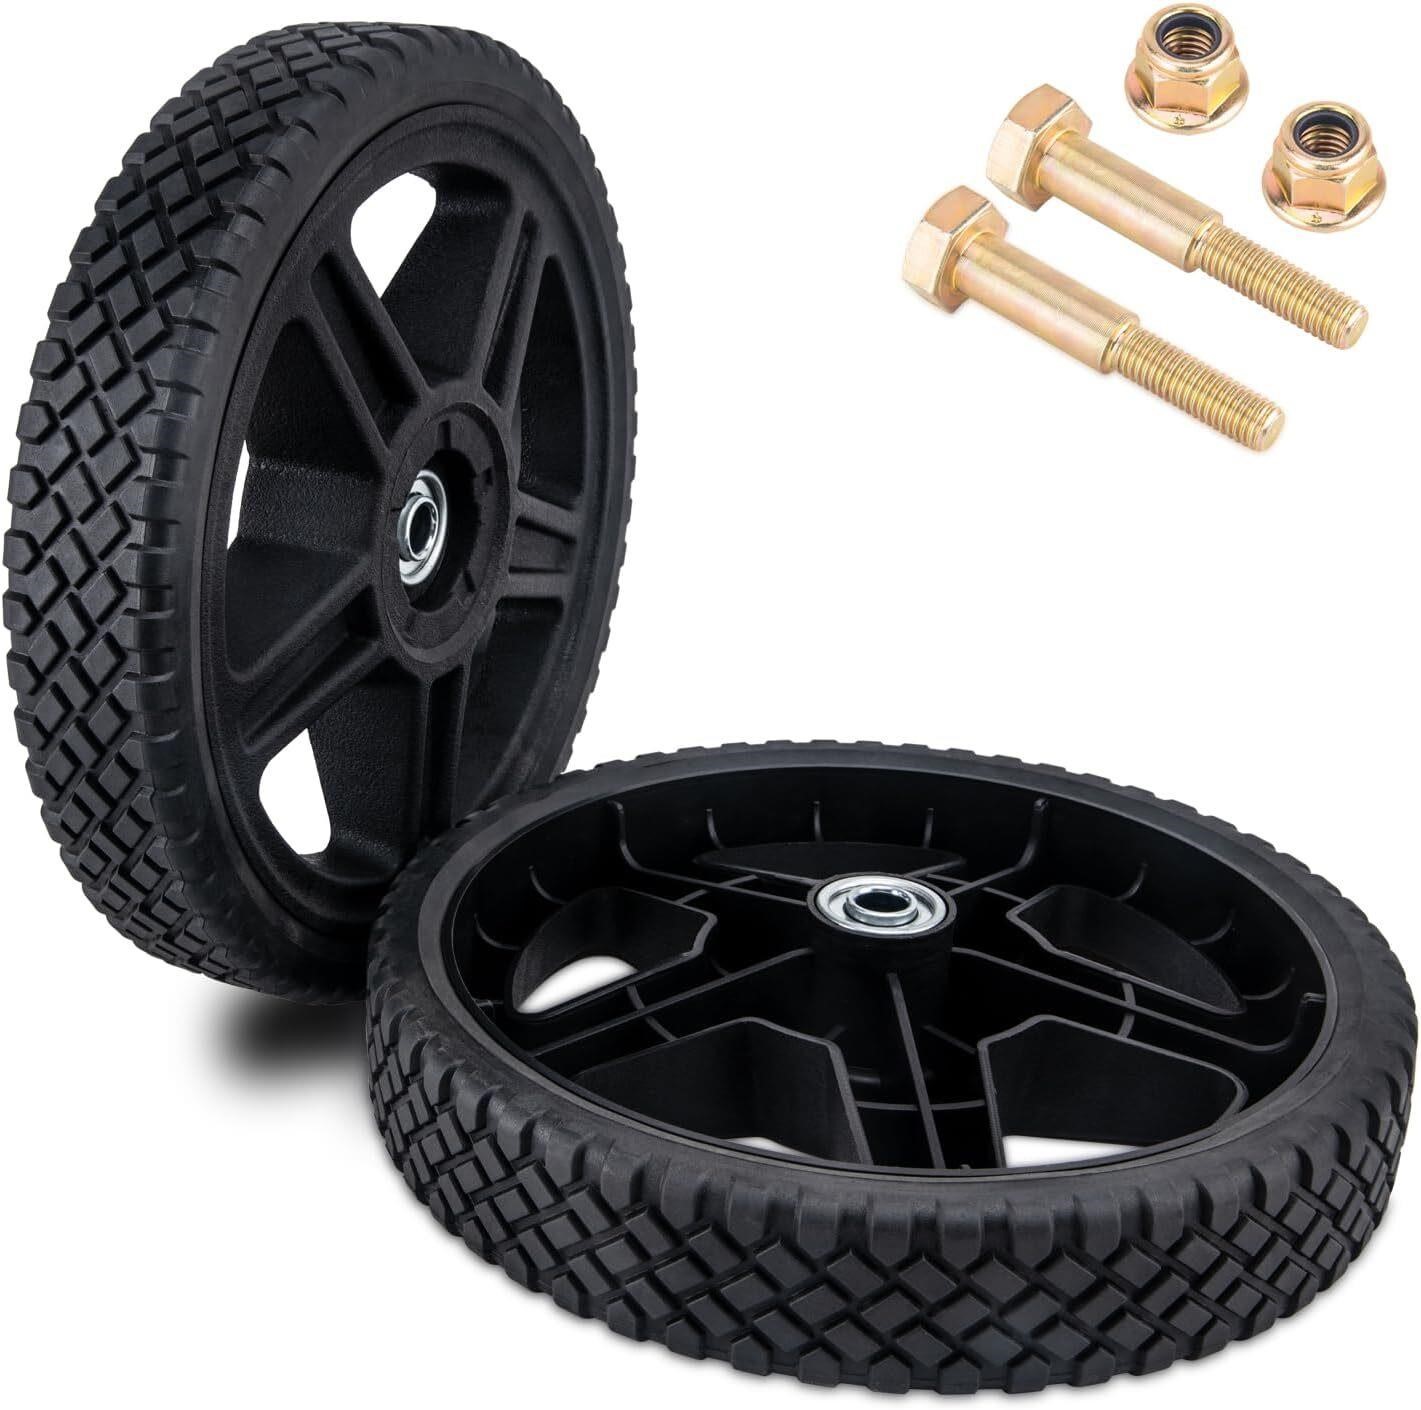 10 Inch Lawn Mower Wheels (2-pack) Fits Most Stand